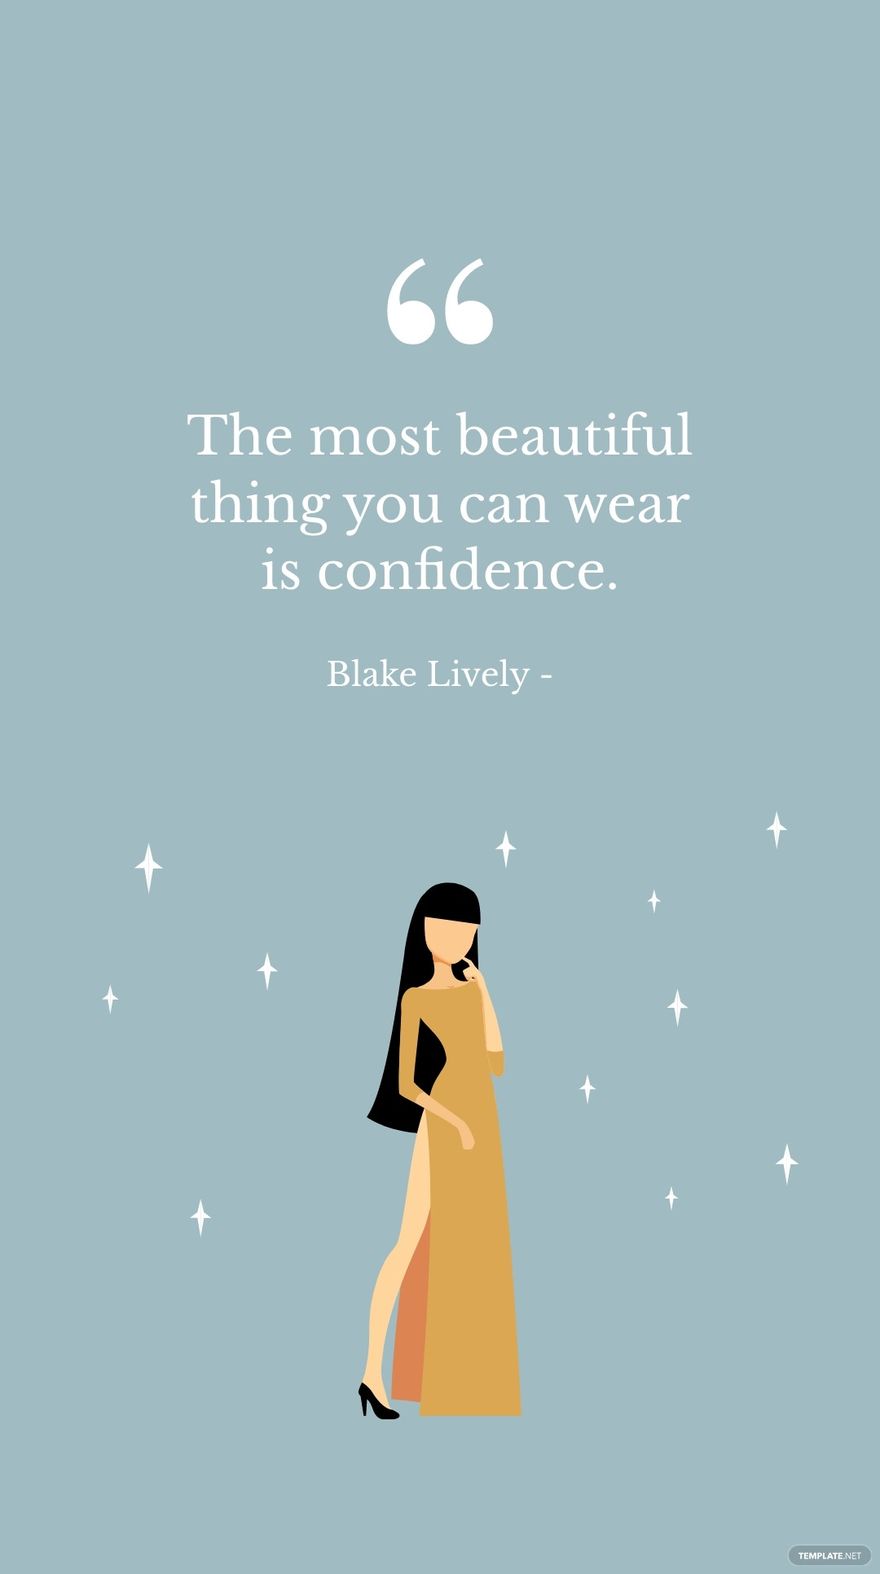 Blake Lively - The most beautiful thing you can wear is confidence. in ...